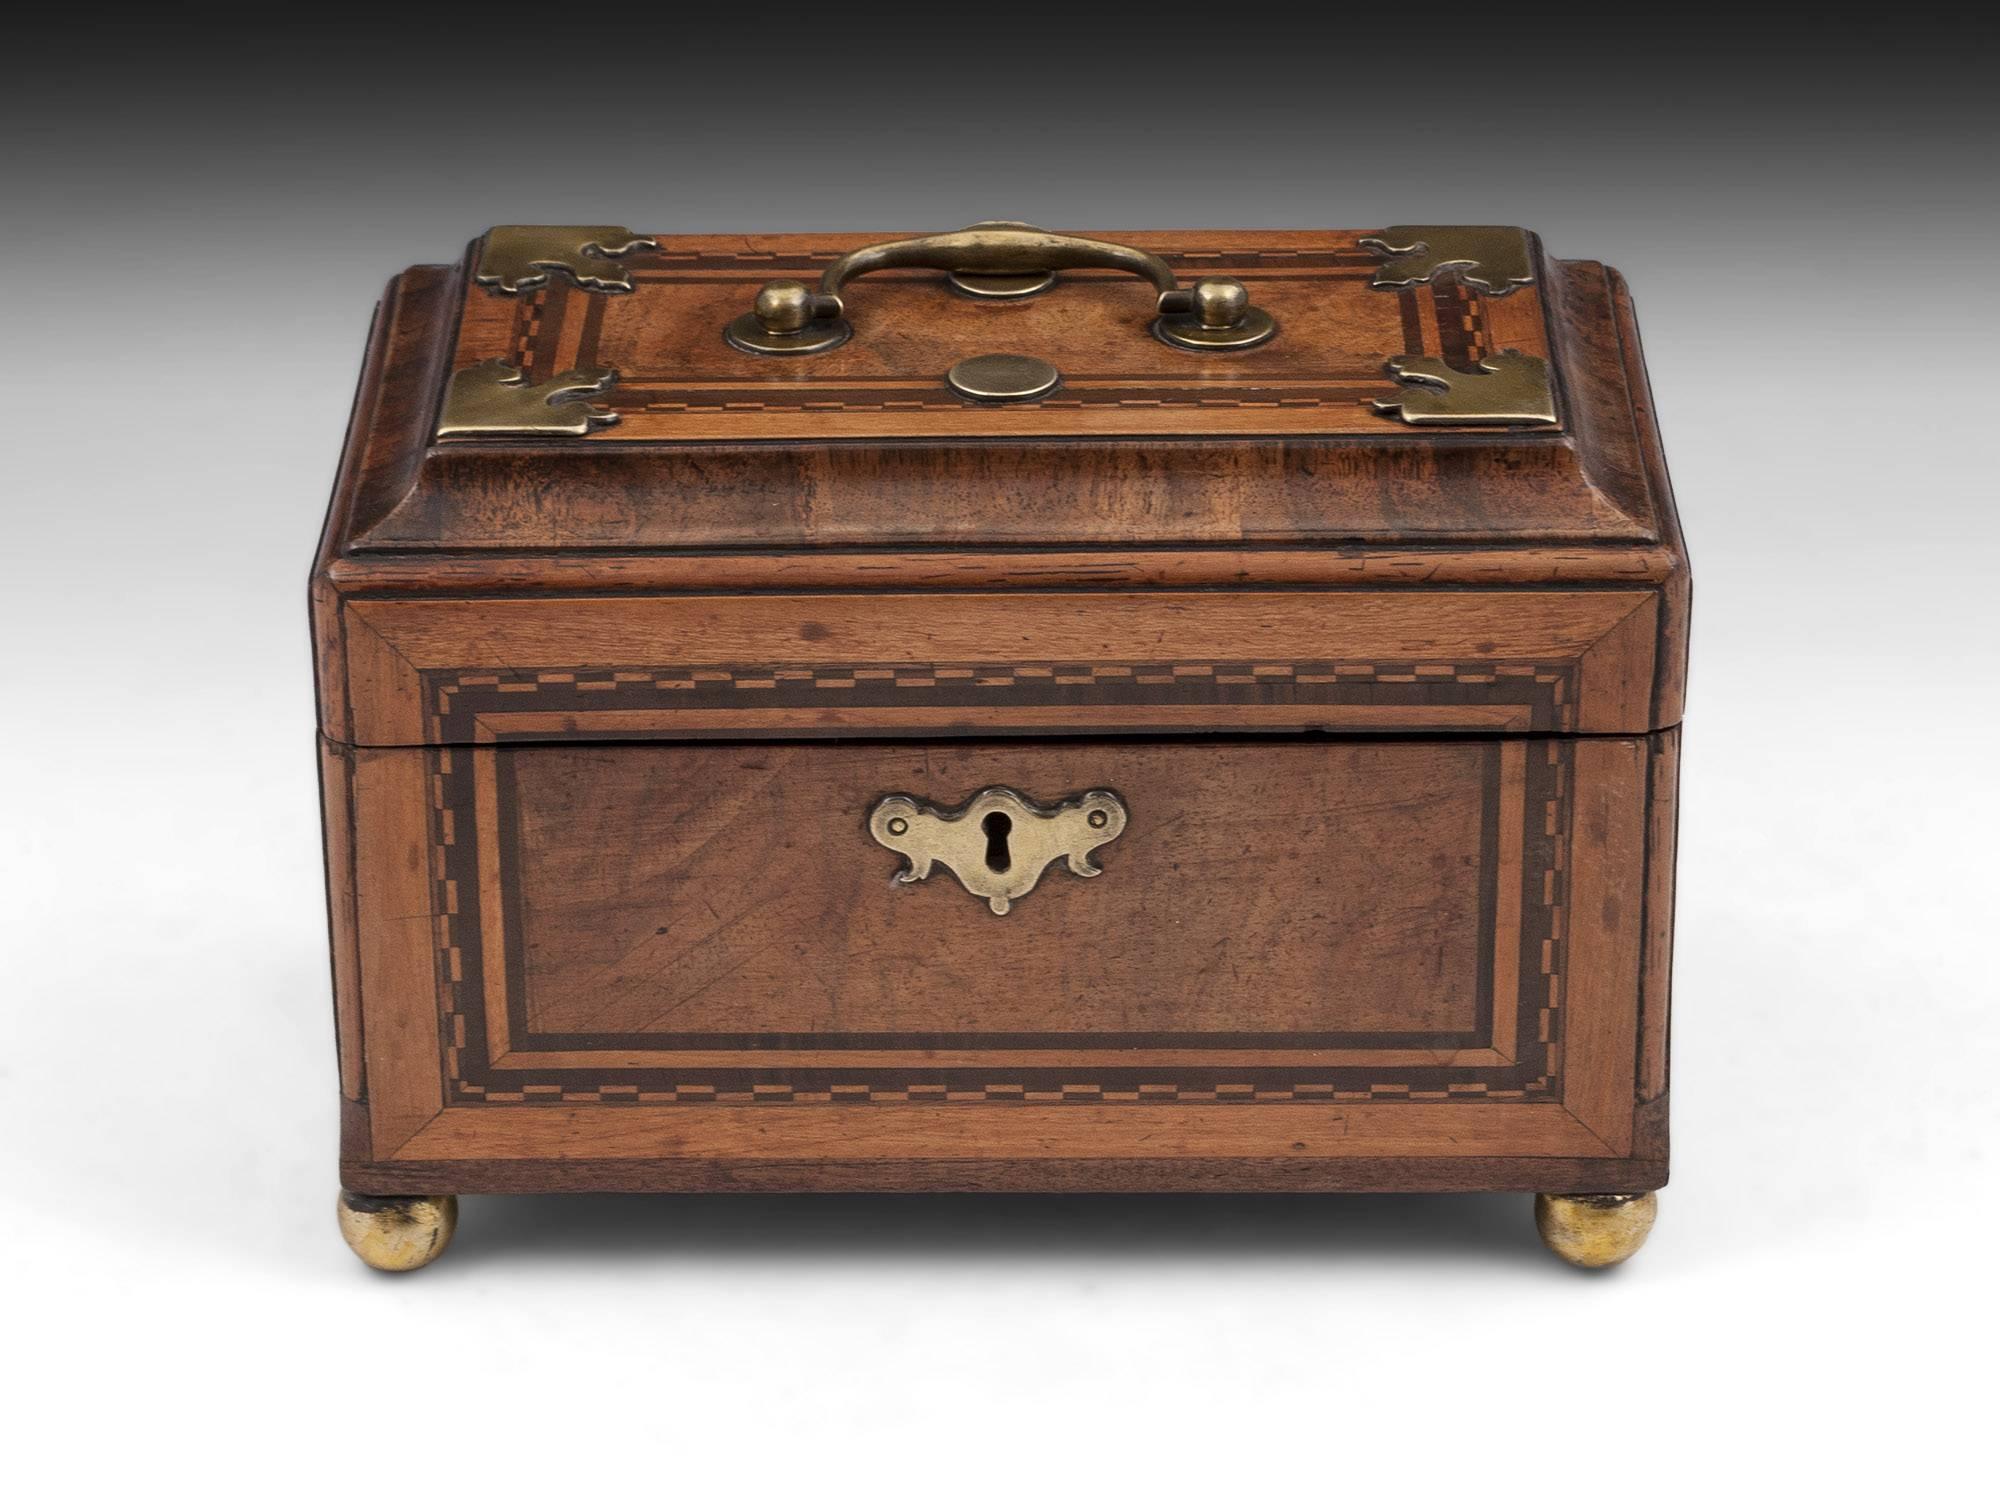 Antique tea caddy with brass handle, decorative edges, escutcheon and ball feet. 

Each side has a panel design with checkered borders. The interior has three compartments with traces of a decorative red finish. 

This tea caddy comes with a